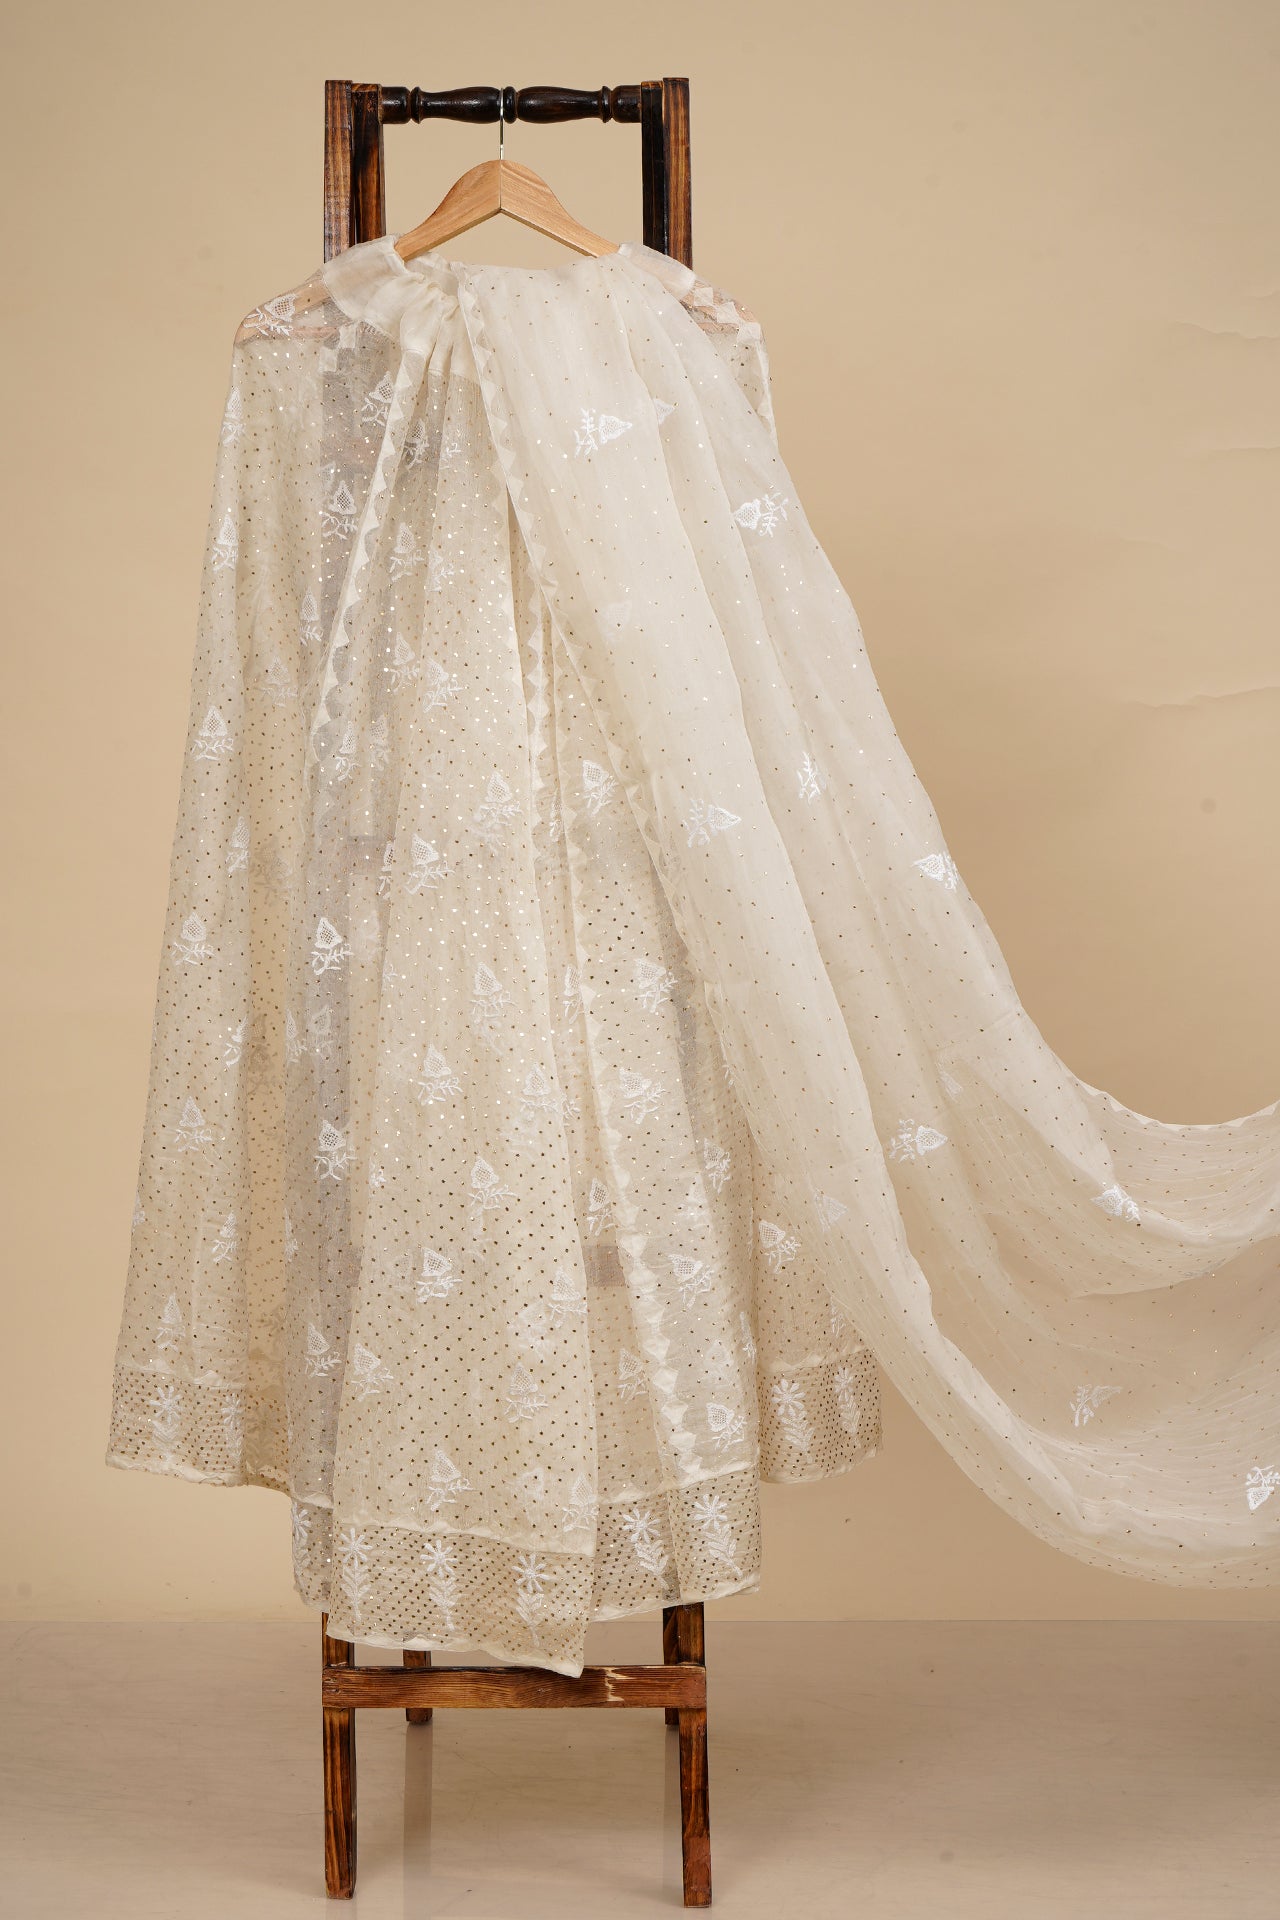 Off White Color Handcrafted Chikankari and Mukaish Work Unstitched Pure Organza Silk Lehenga Set with Dupatta